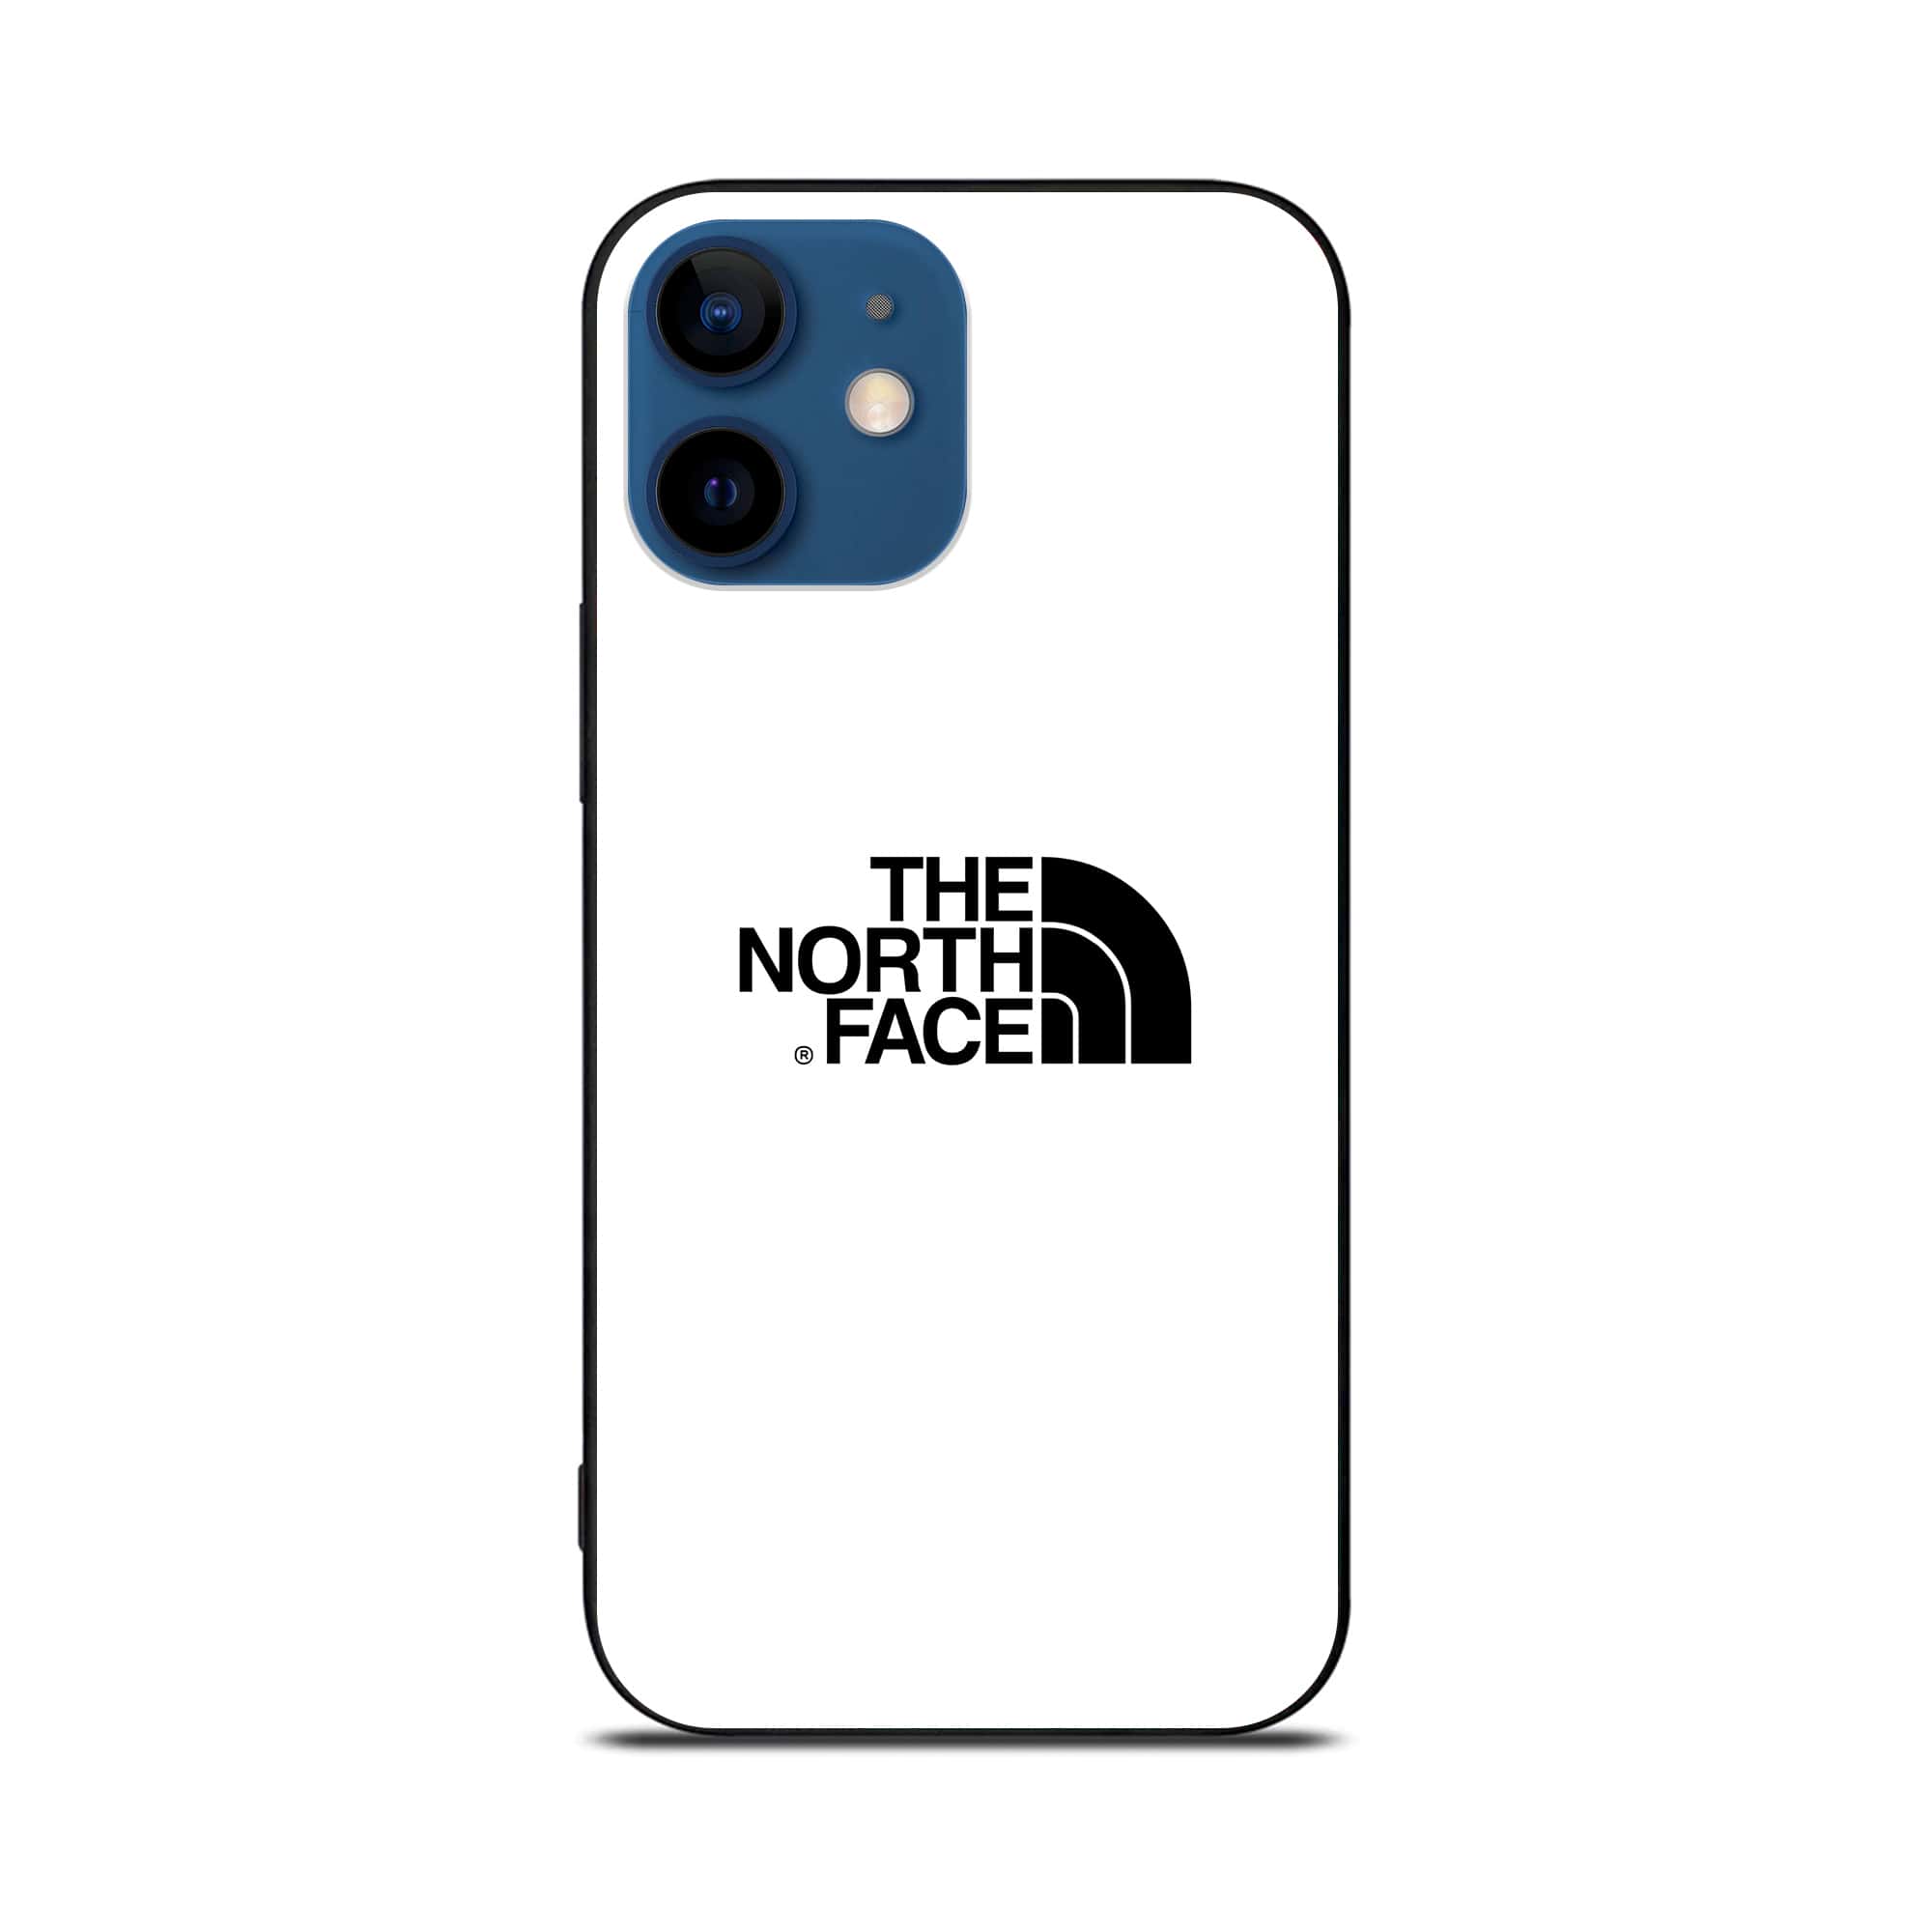 iPhone 12 The North Face Series Premium Printed Glass soft Bumper shock Proof Case